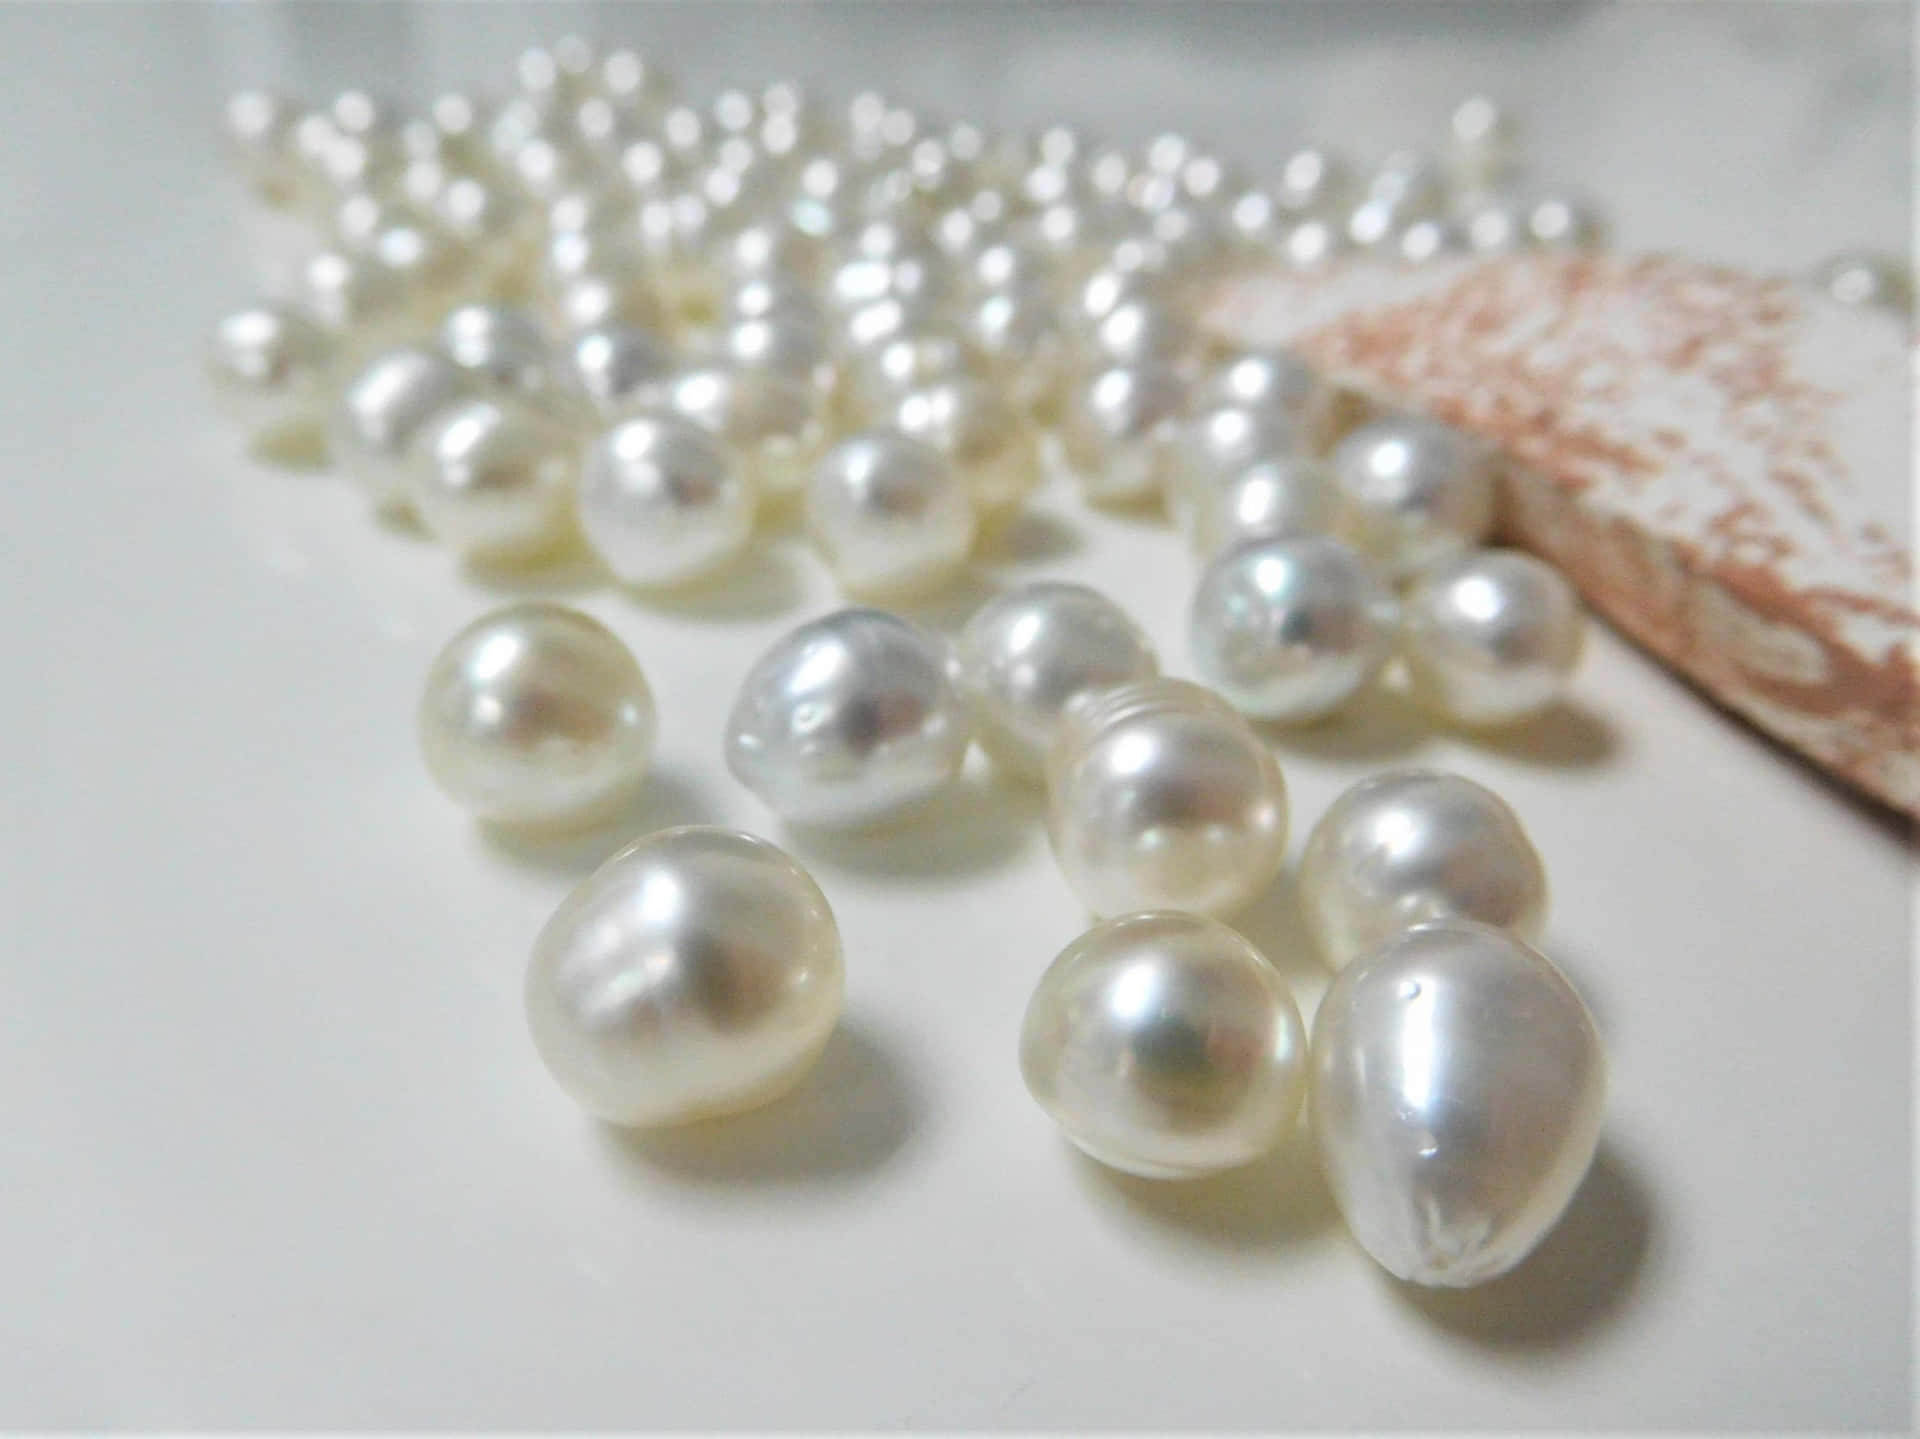 Shine Bright: Make a Style Statement with Pearl Jewelry